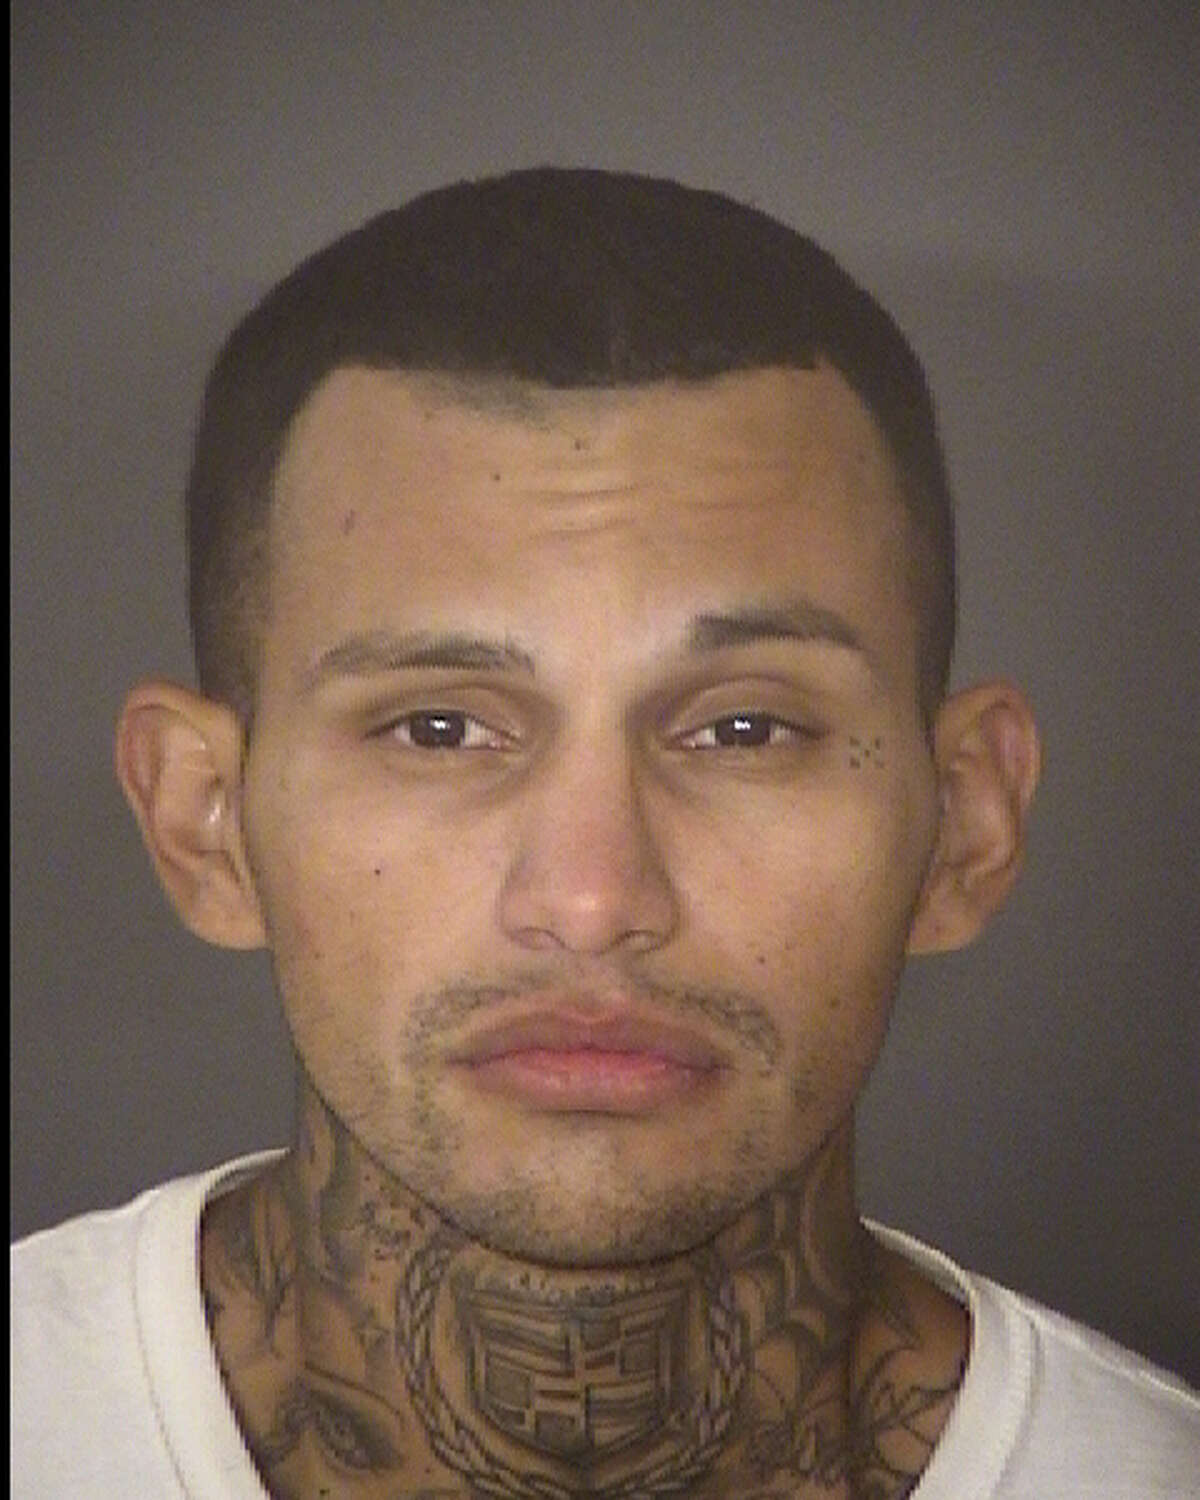 Alfredo Alejandro Herrera, 25, faces a charge of sexual assault of a child.